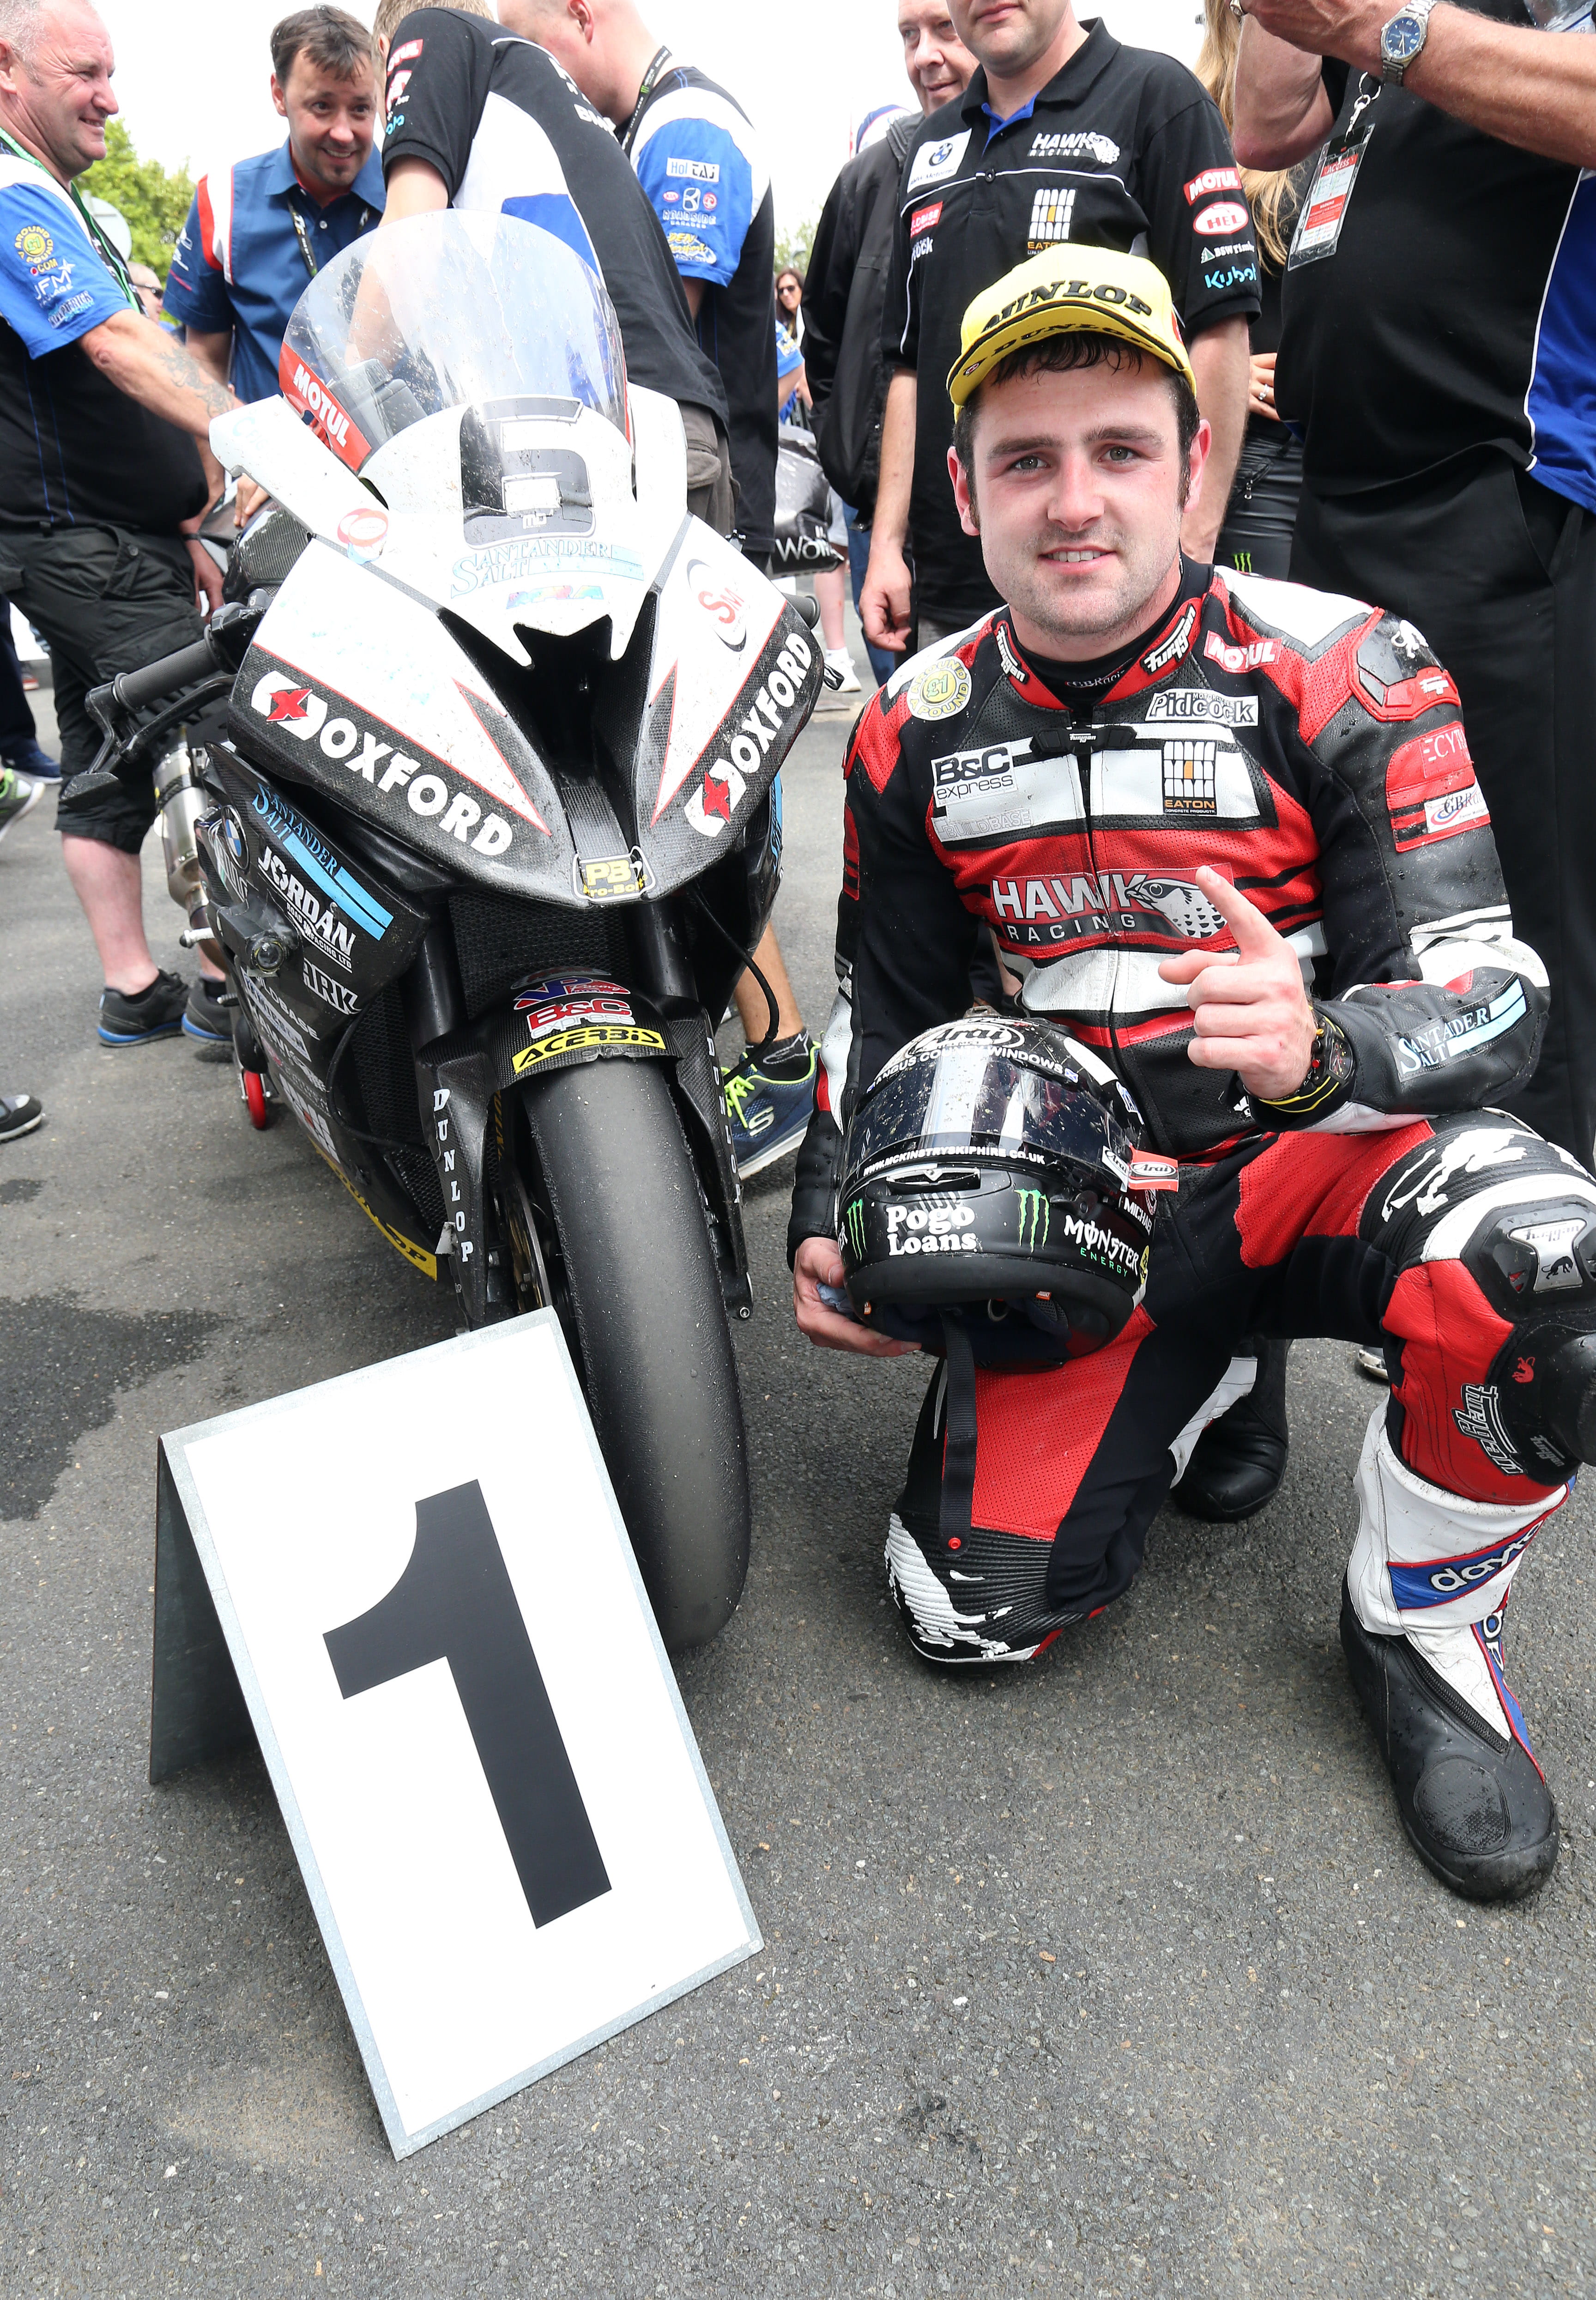 Dunlop smashed the lap record